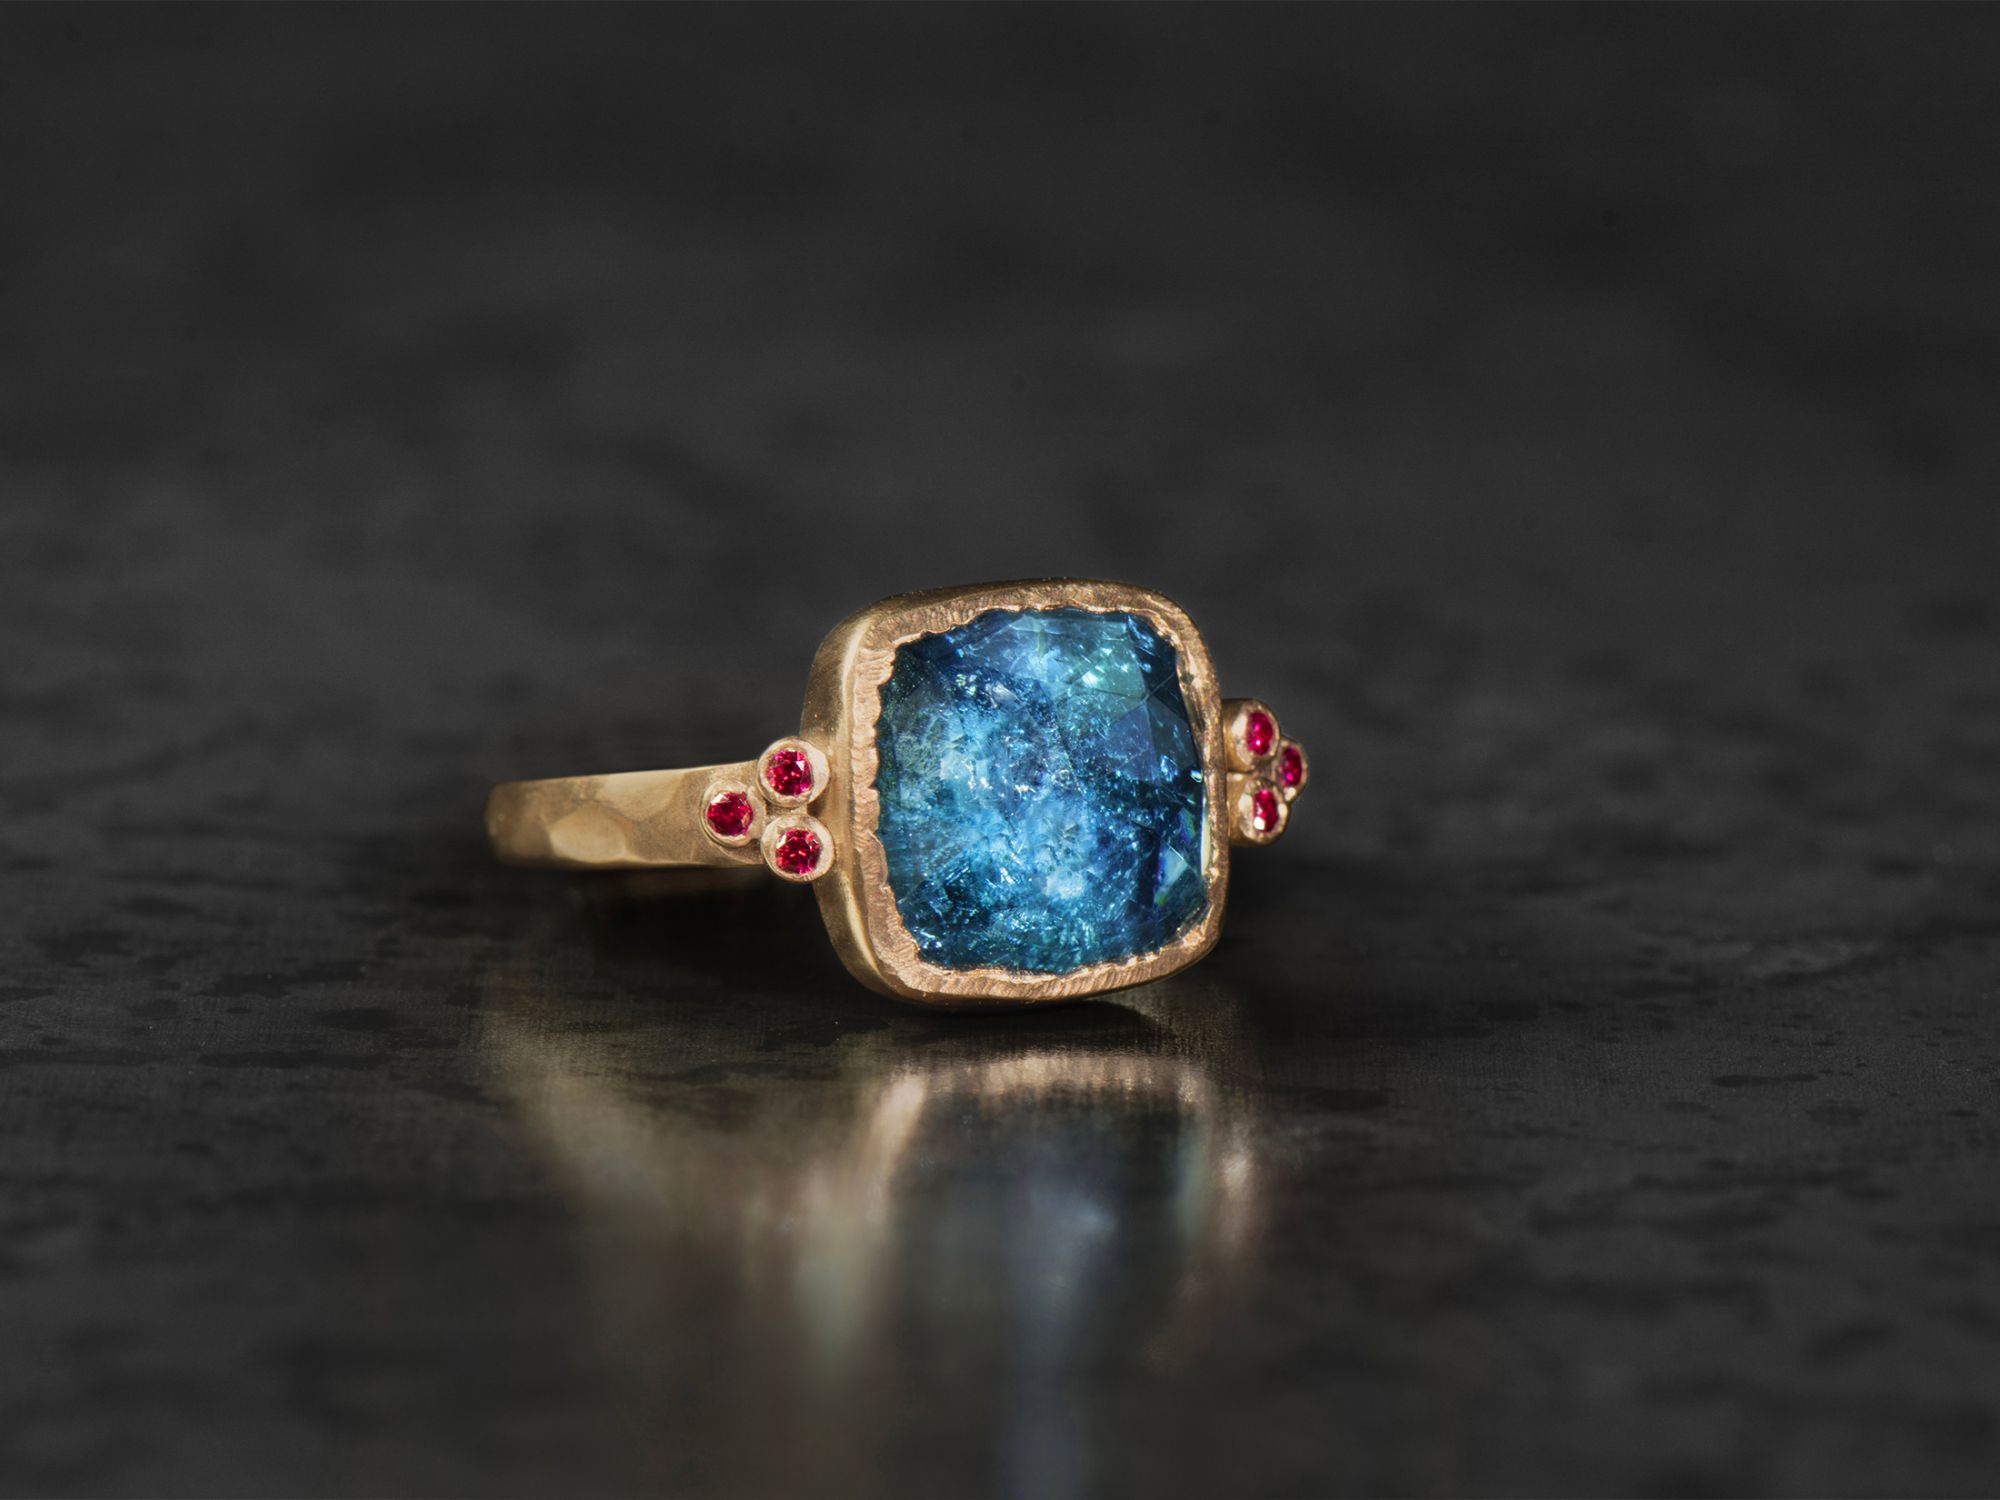 Queen rubies and blue tourmaline ring by Emmanuelle Zysman